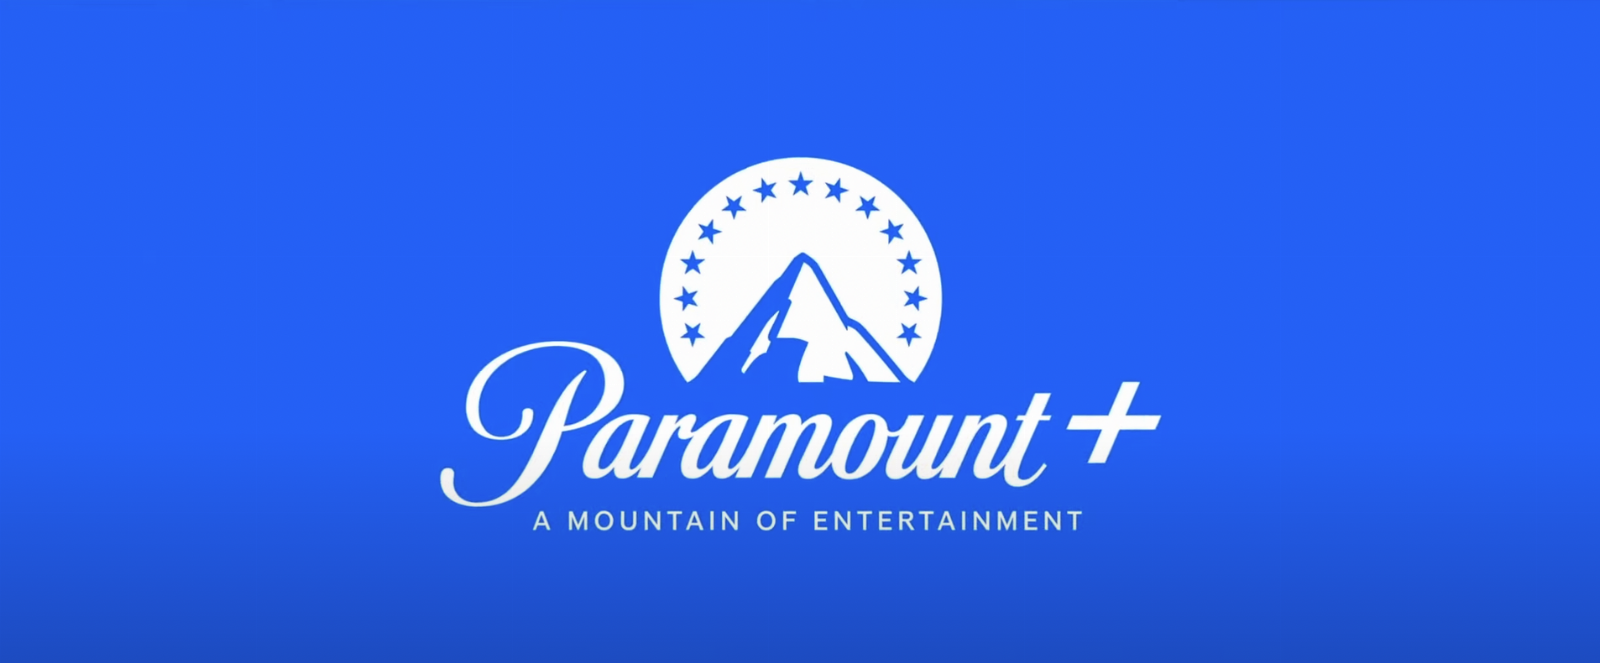 Paramount+ tops 61 million subscribers after Showtime merger